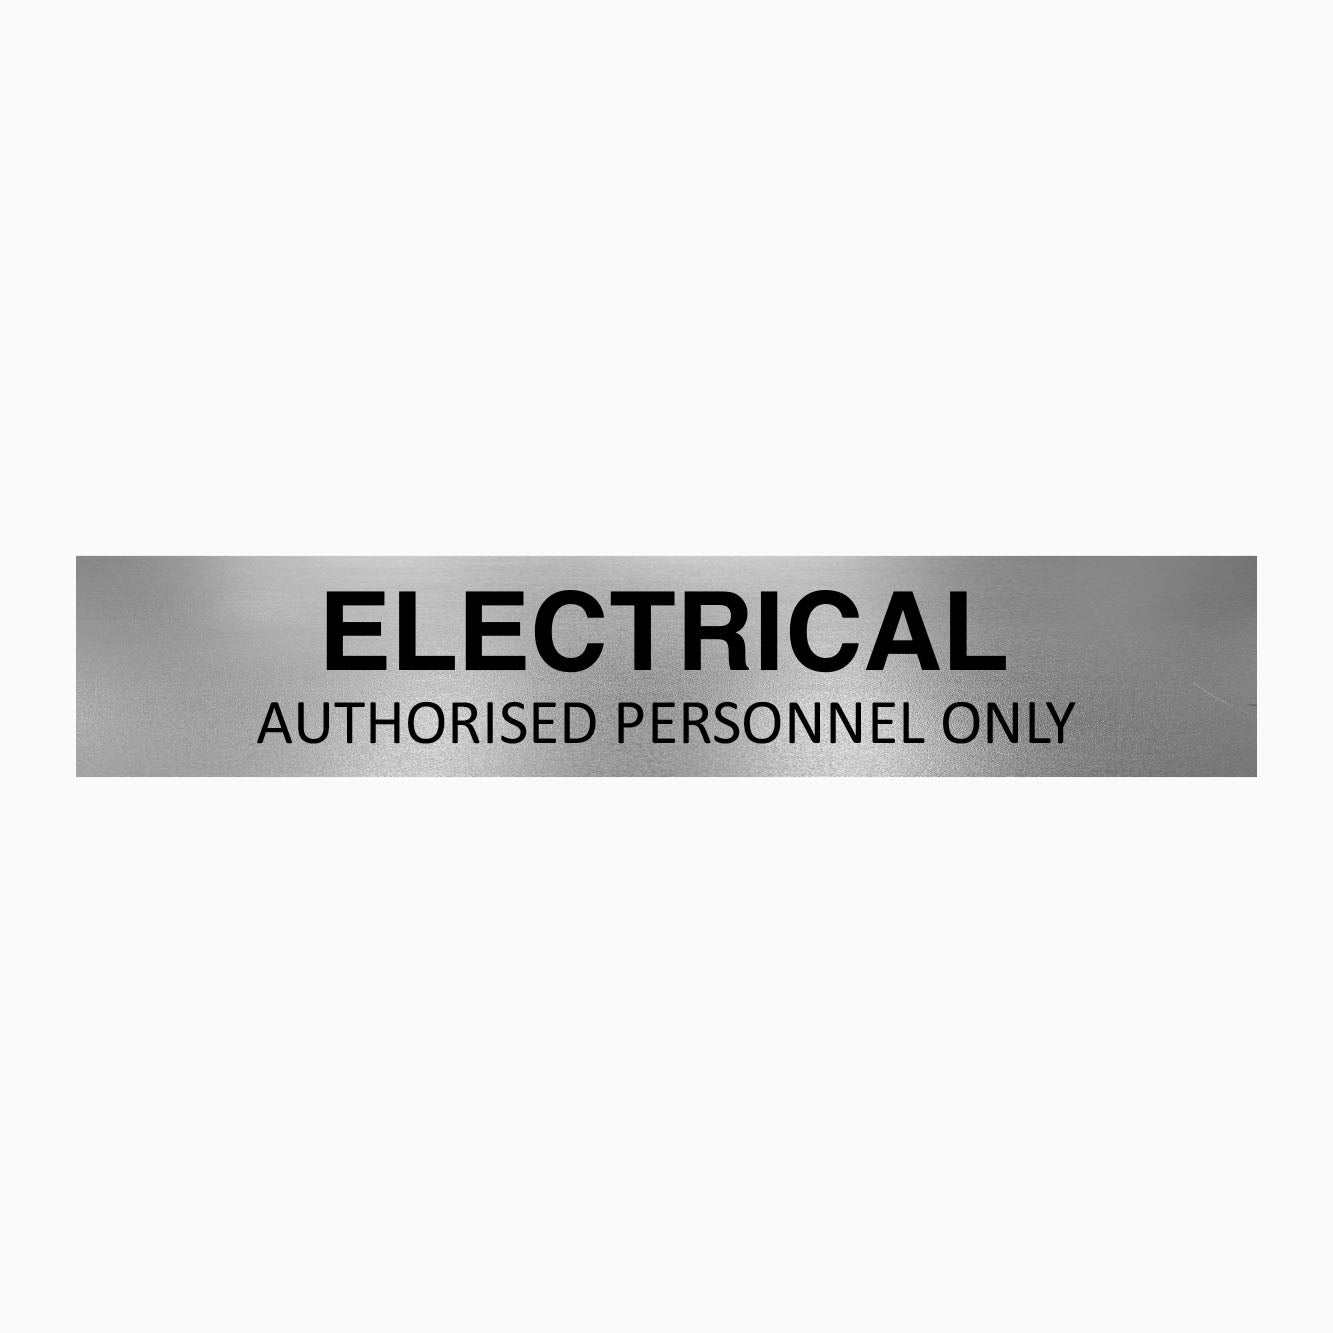 ELECTRICAL SIGN  - AUTHORISED PERSONNEL ONLY SIGN - GET SIGNS